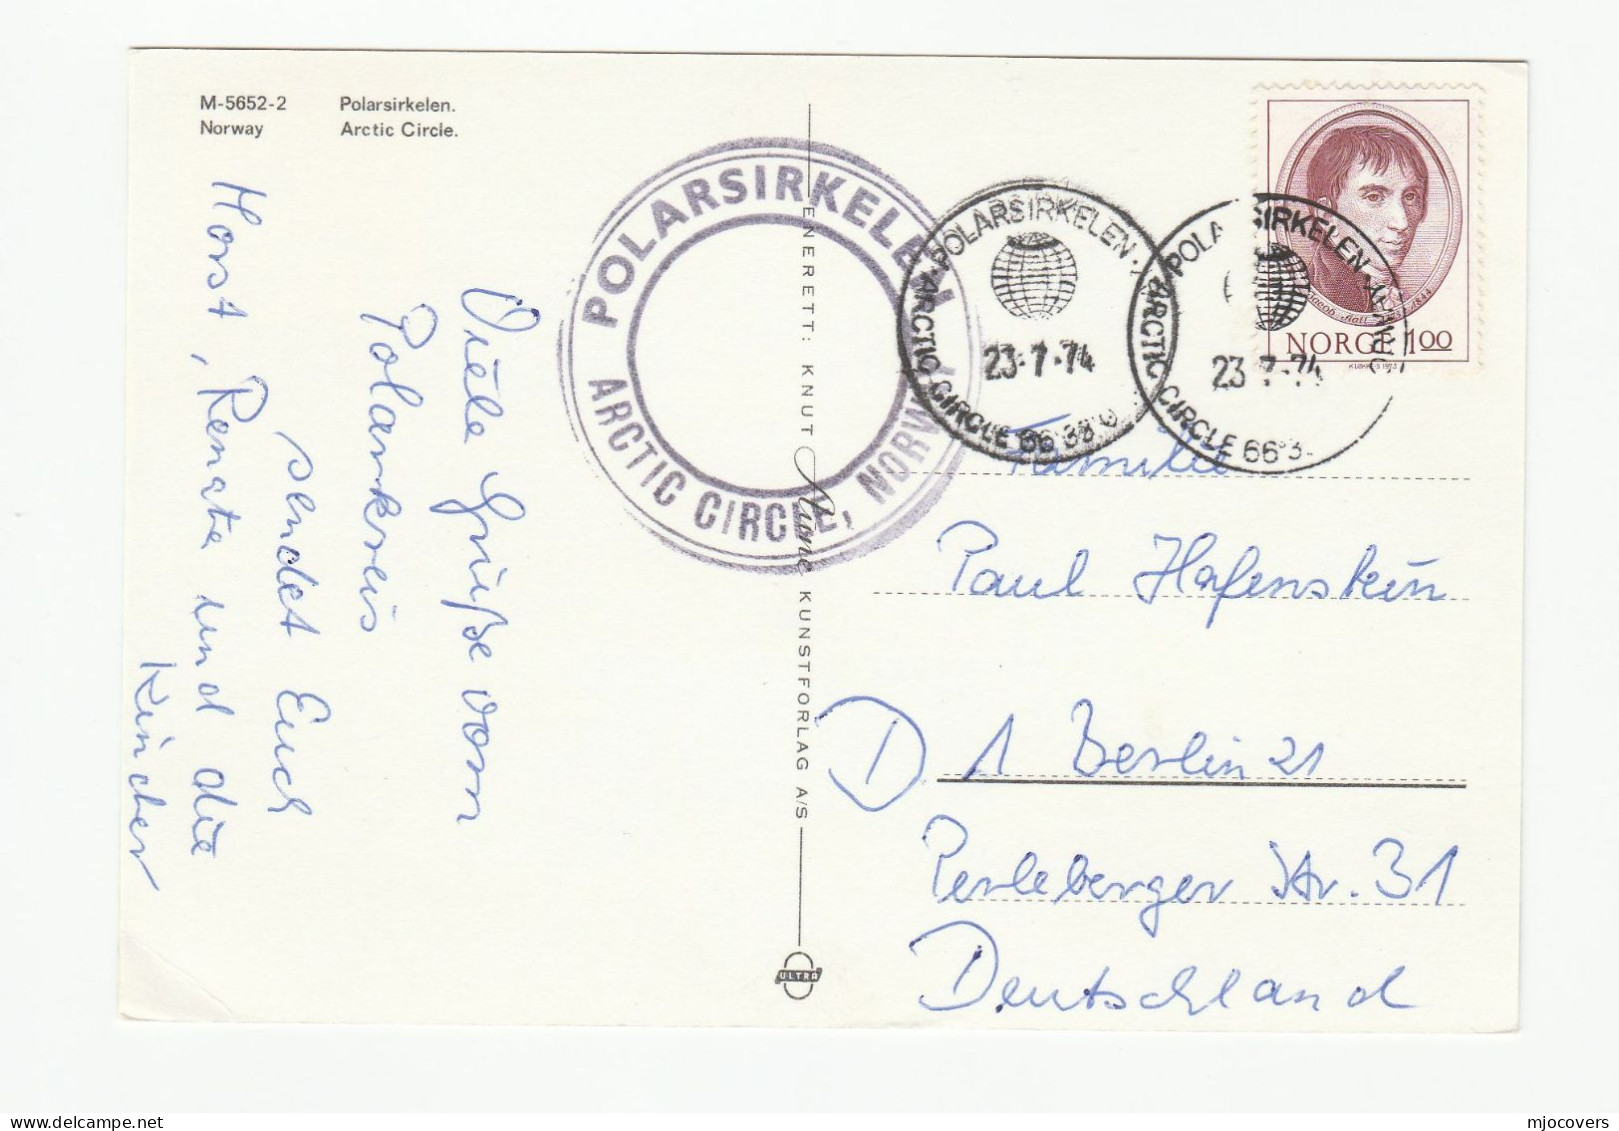 Polarsirkelen ARCTIC CIRCLE Norway 1974 Postcard To Germany Cover Stamps Polar - Arctic Expeditions